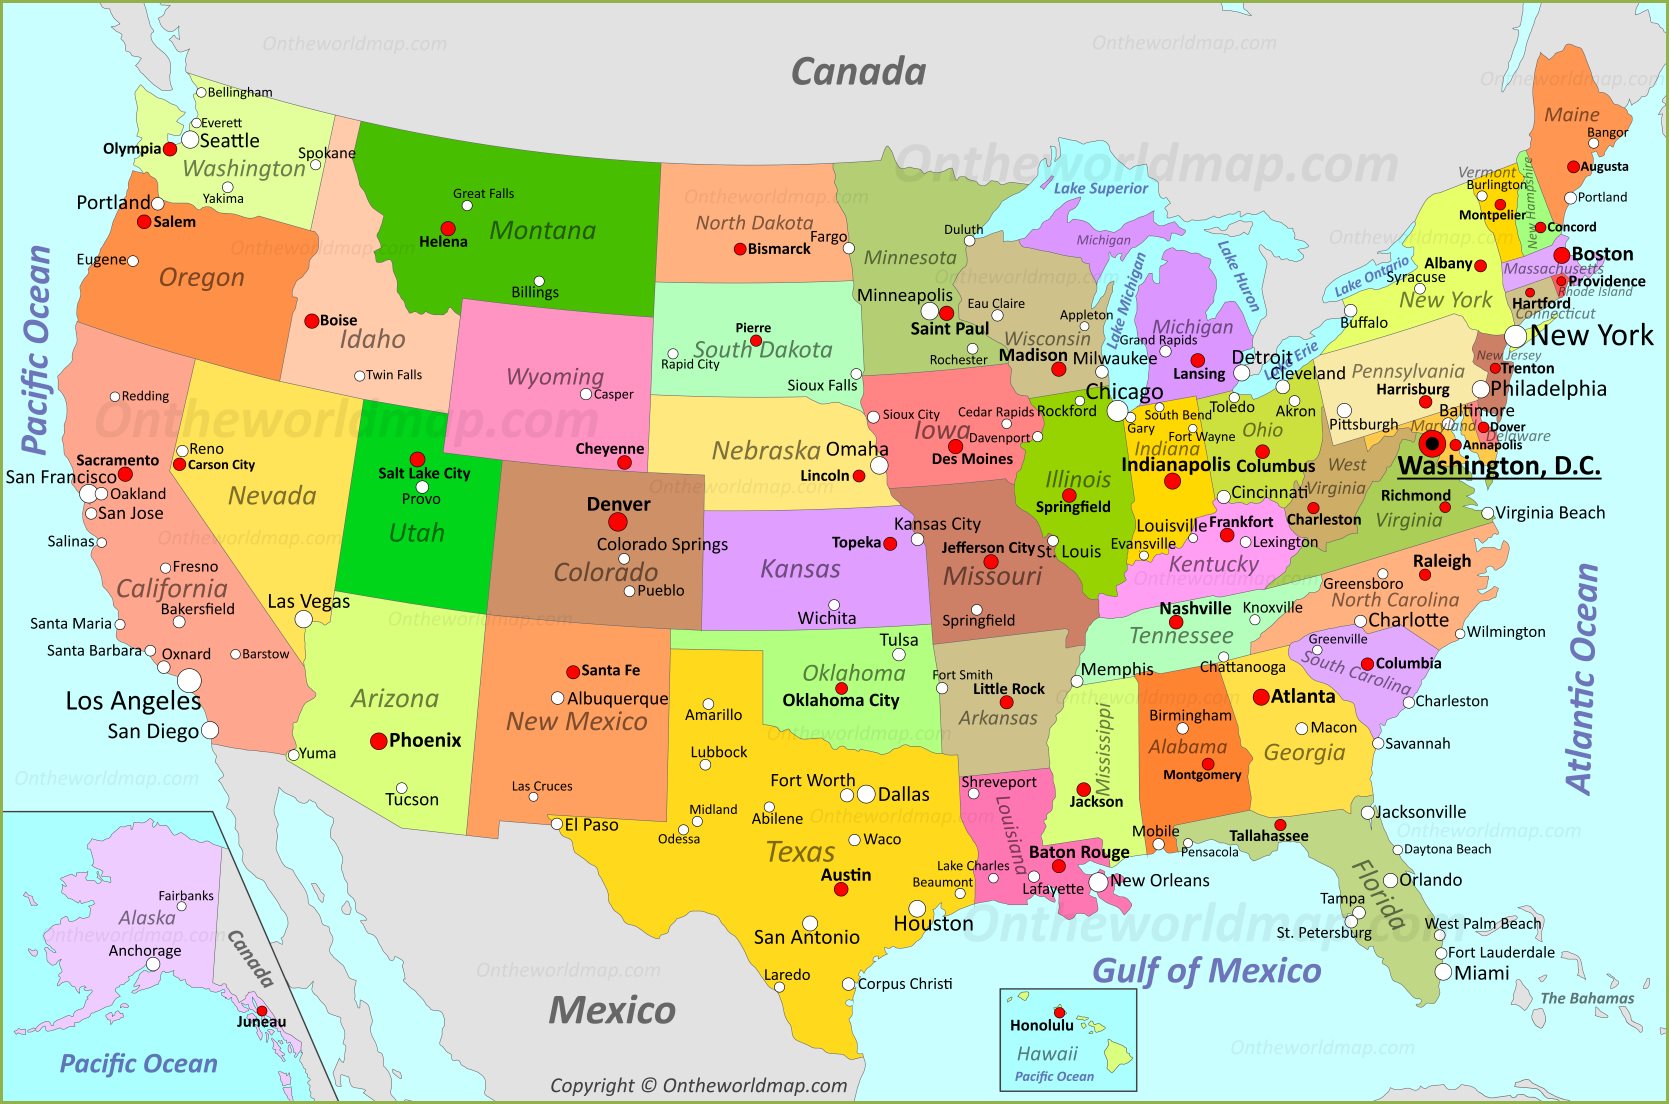 usa-states-map-us-states-map-america-states-map-states-map-of-the